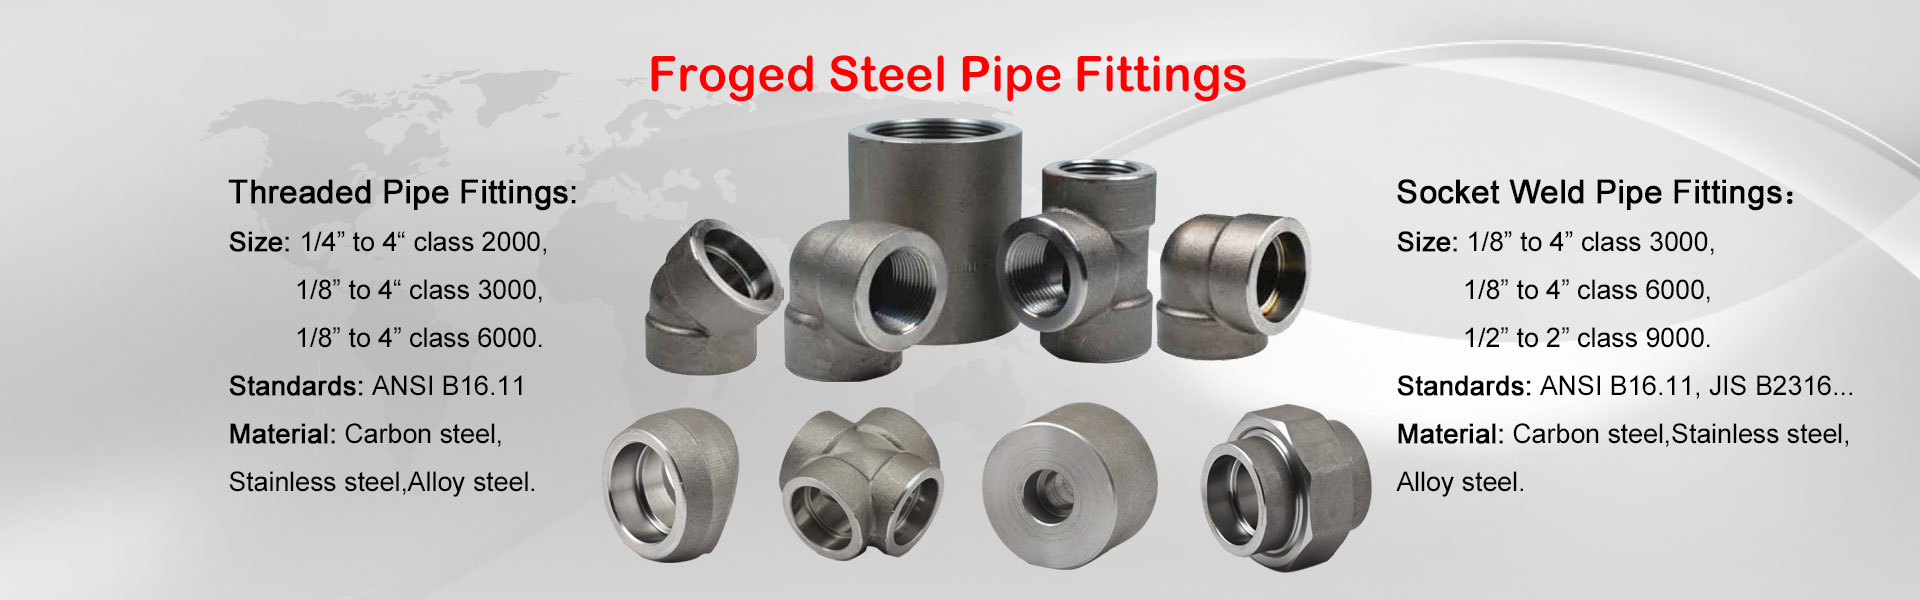 Forged-Steel-Pipe-Fittings